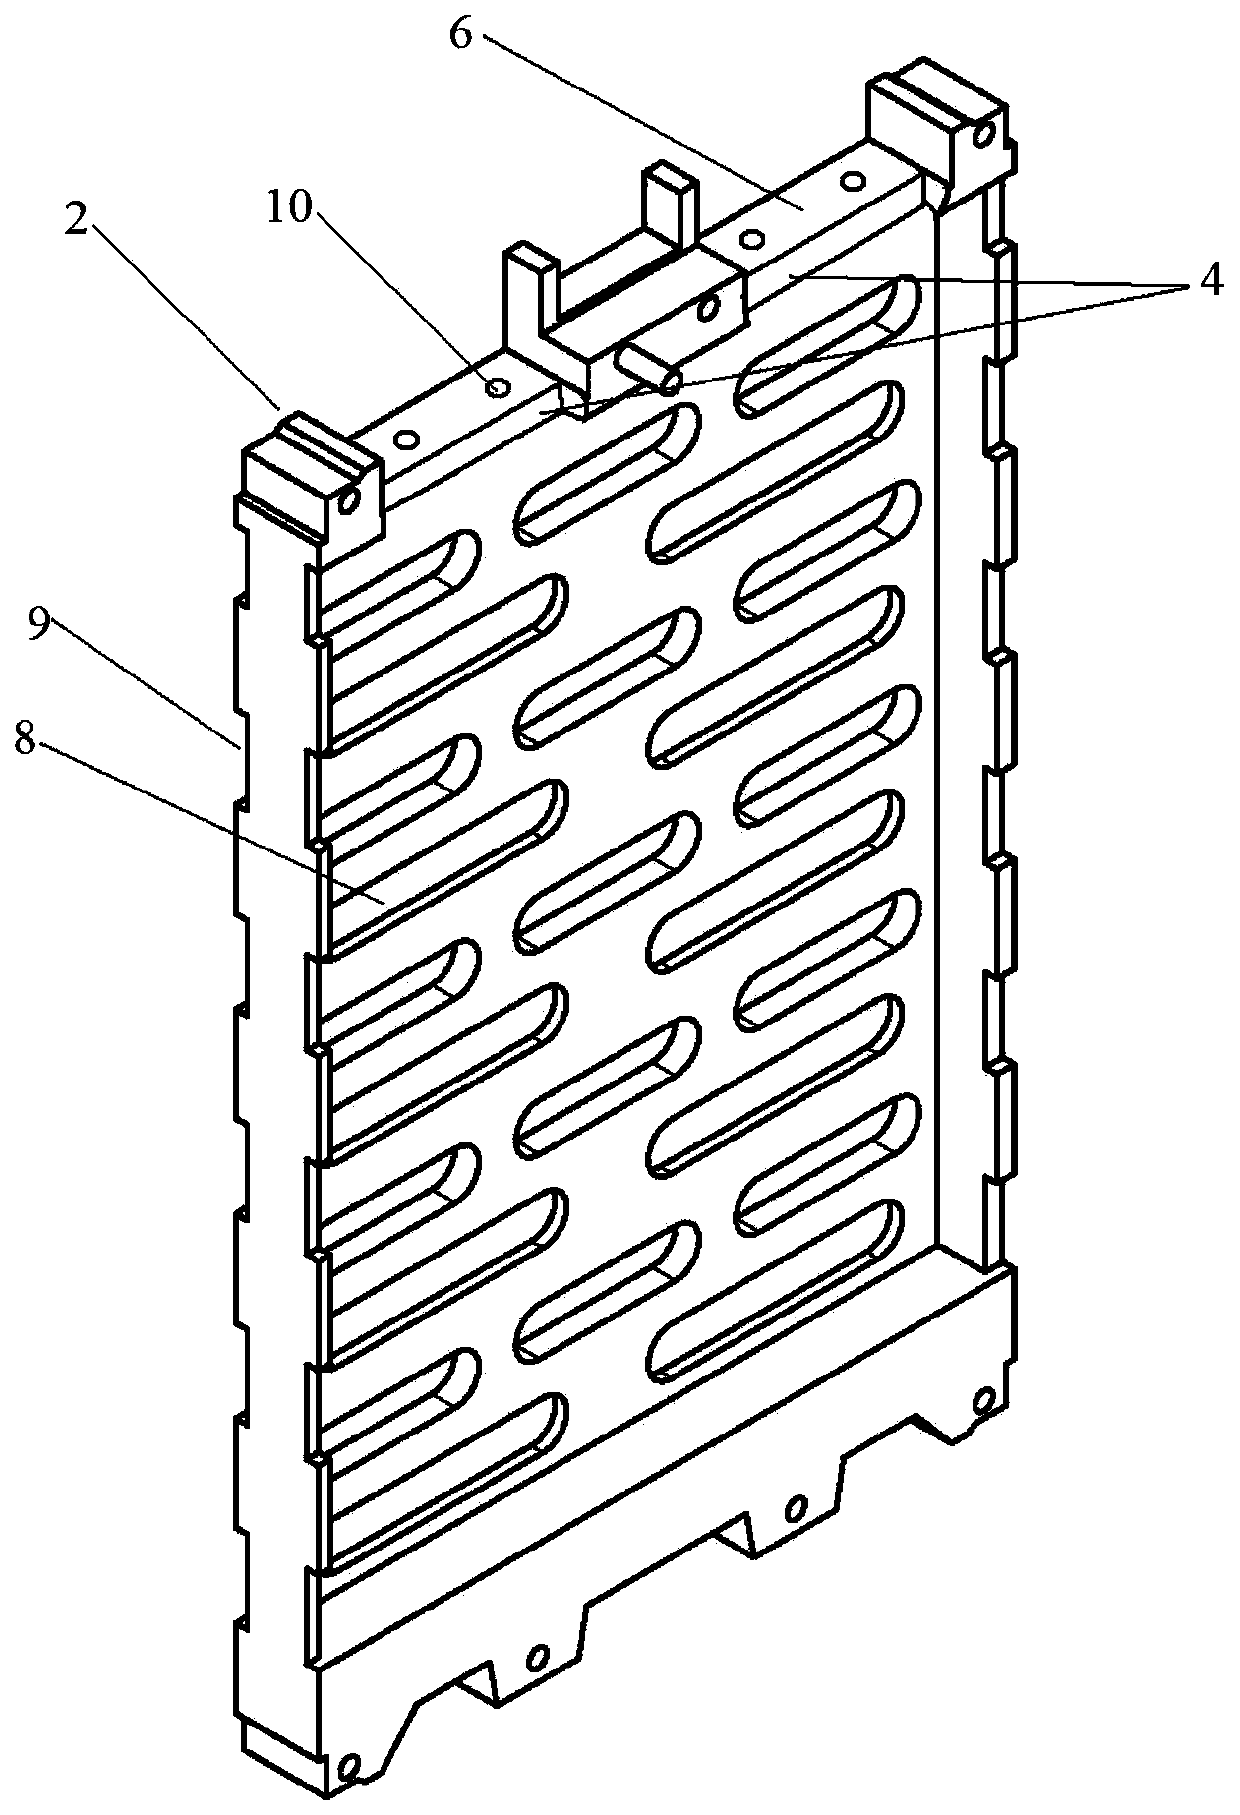 Cell assembling structure of combined battery